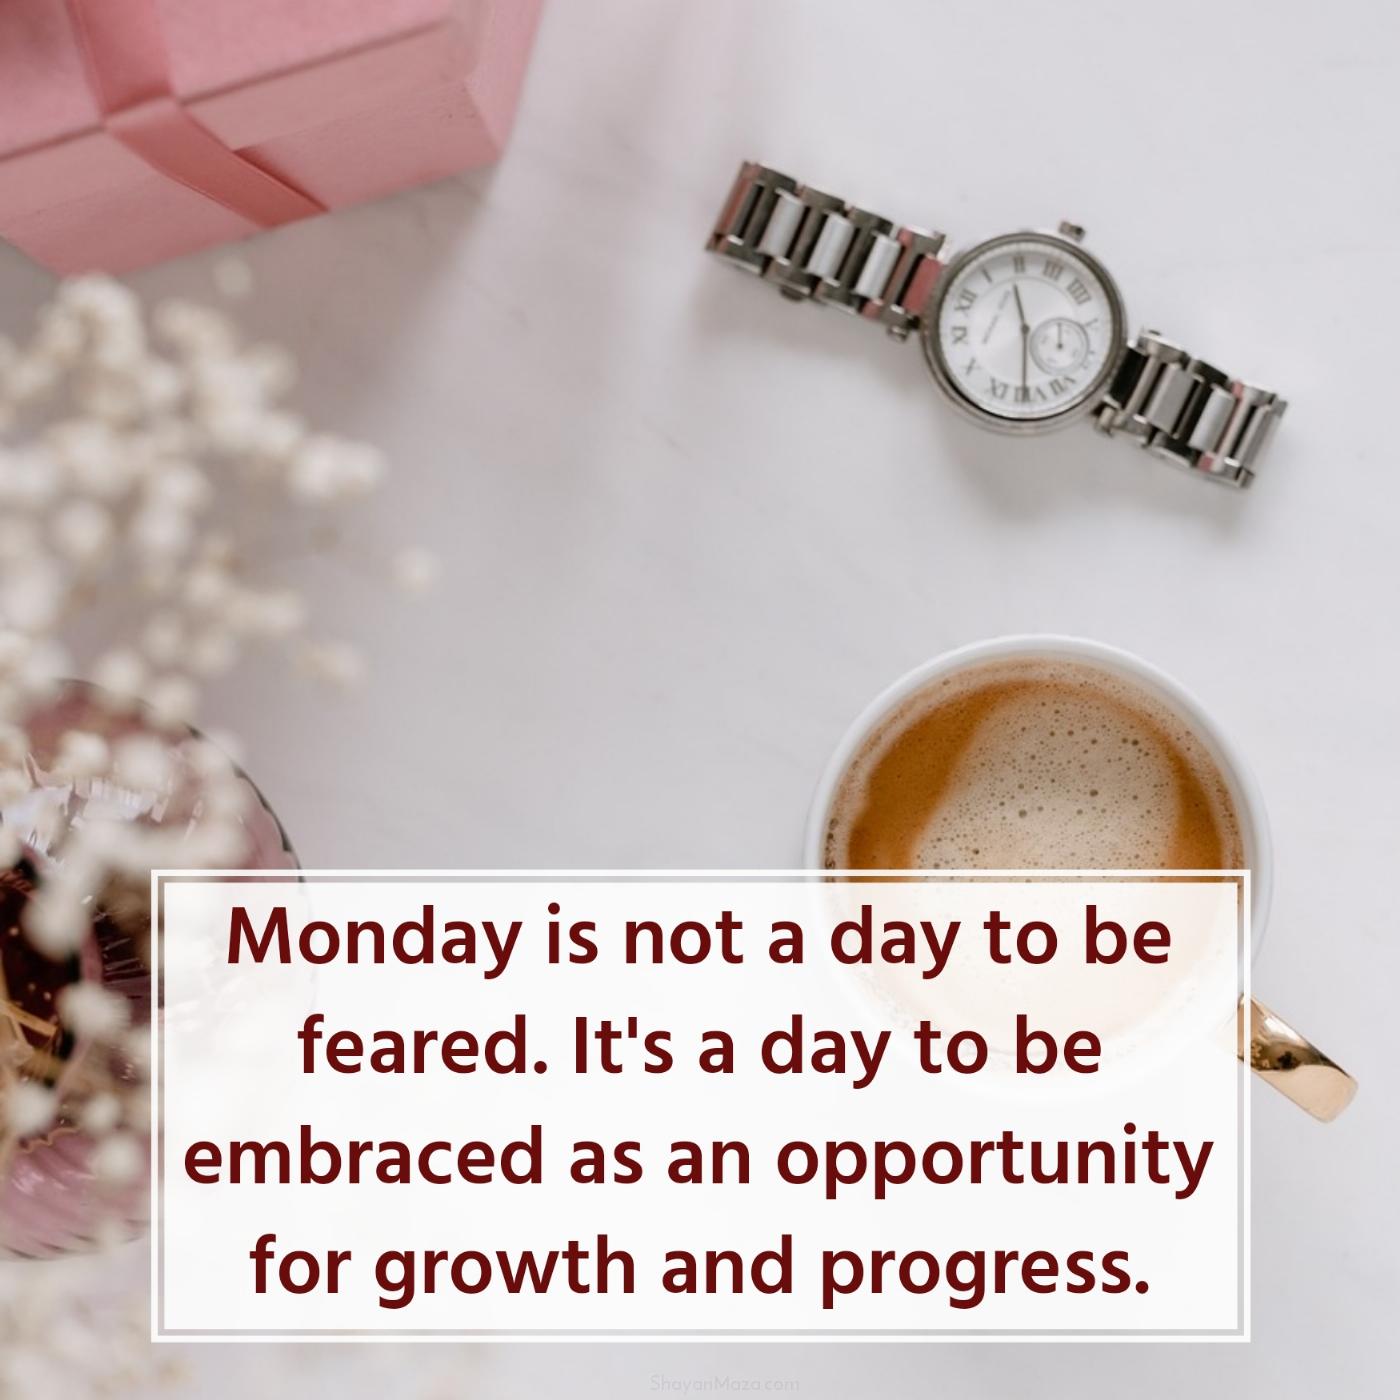 Monday is not a day to be feared